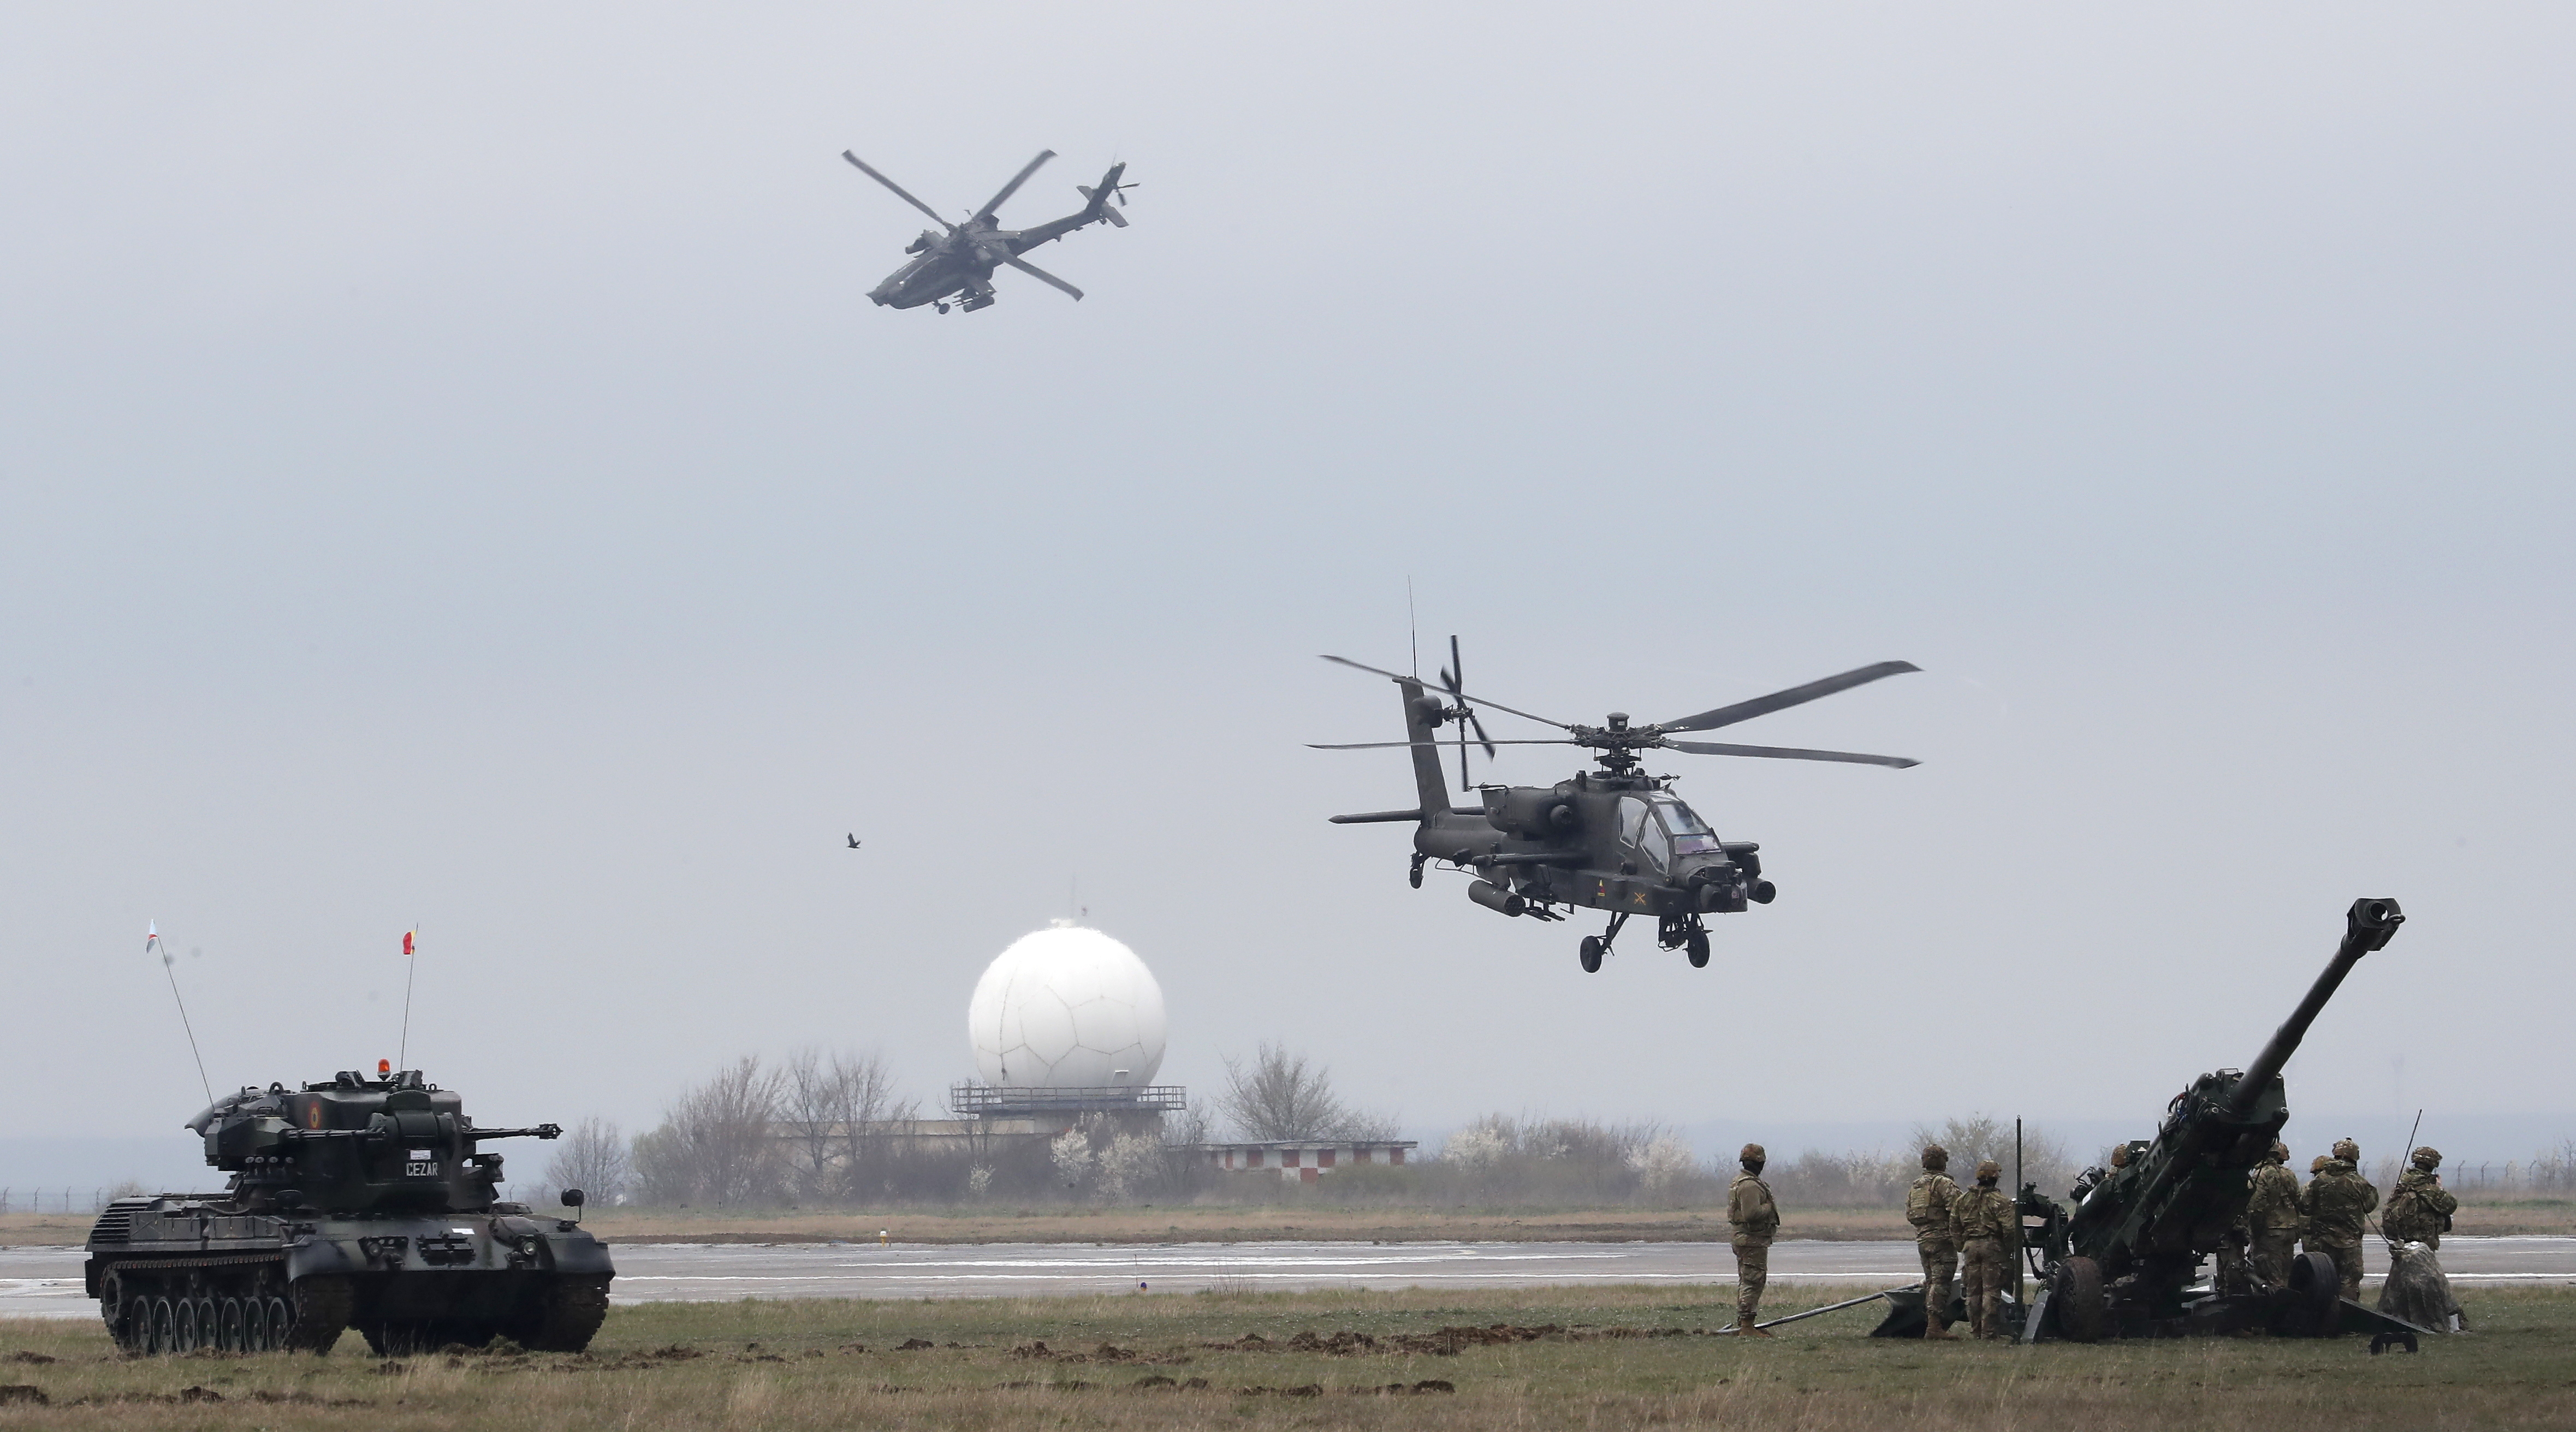 Two US Apache helicopters and land forces in action during Nato exercises in Romania